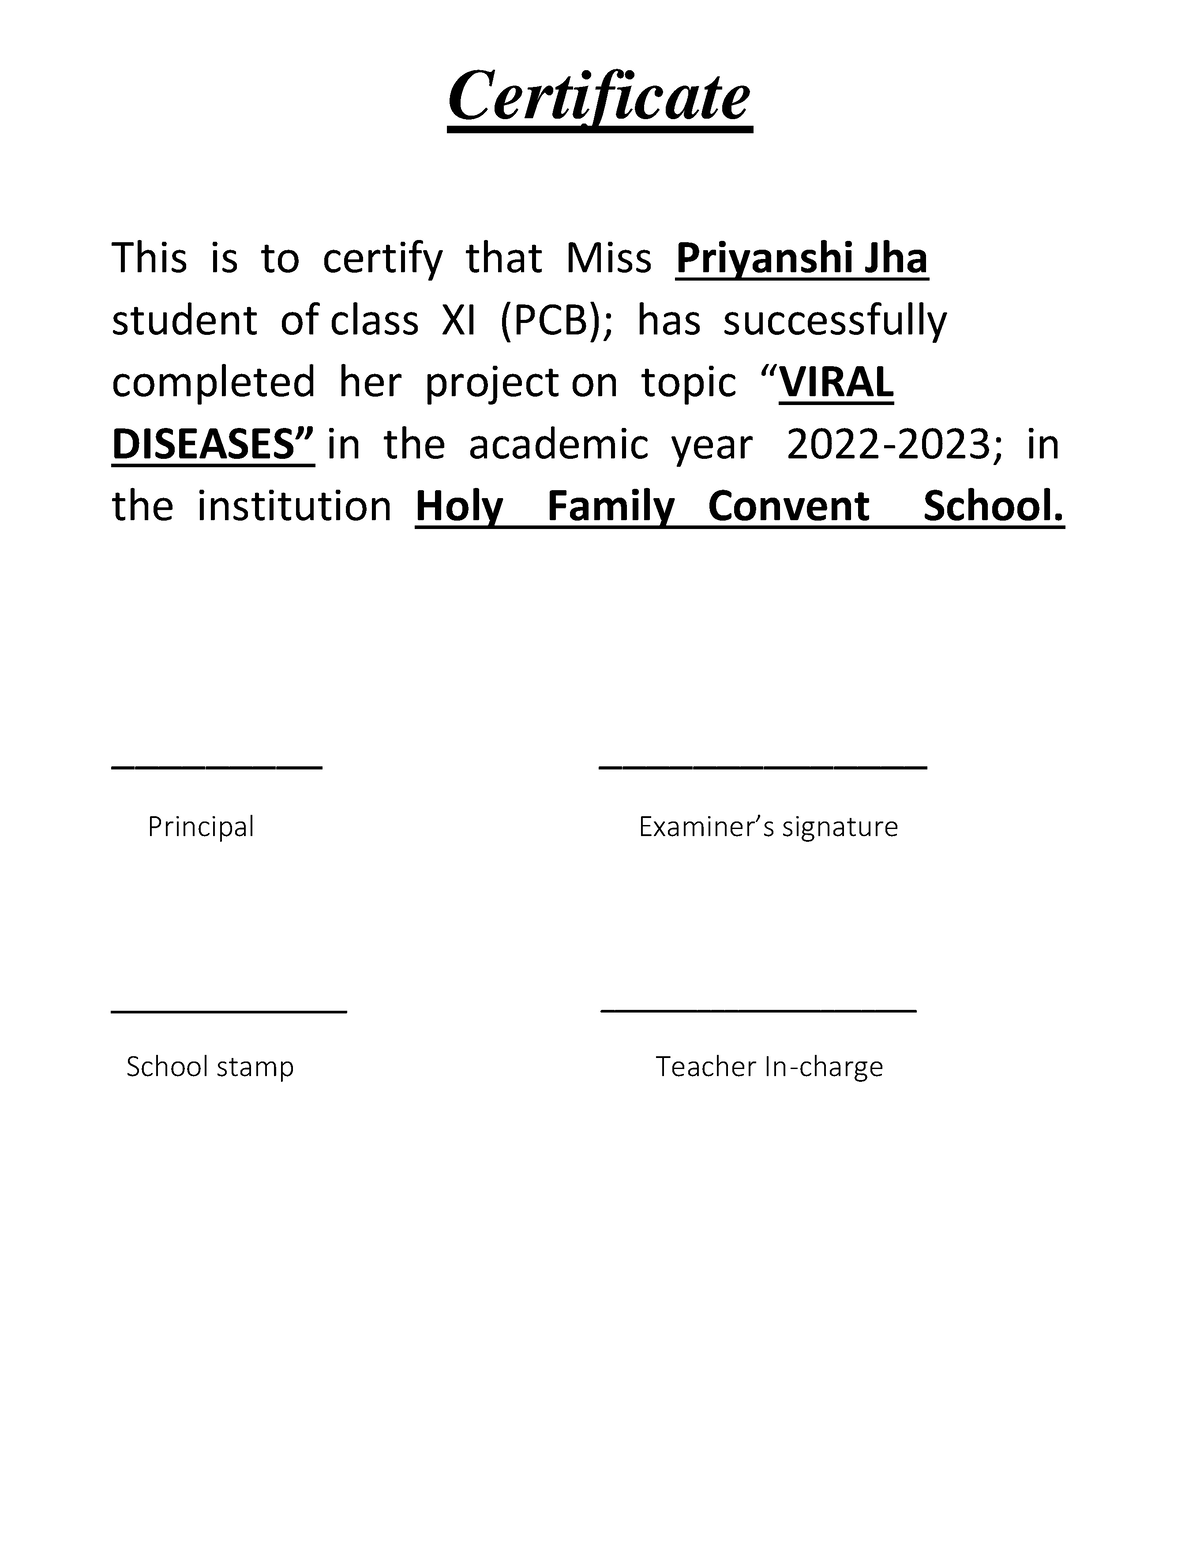 BIO Project 12 Certificate This is to certify that Miss Priyanshi Jha